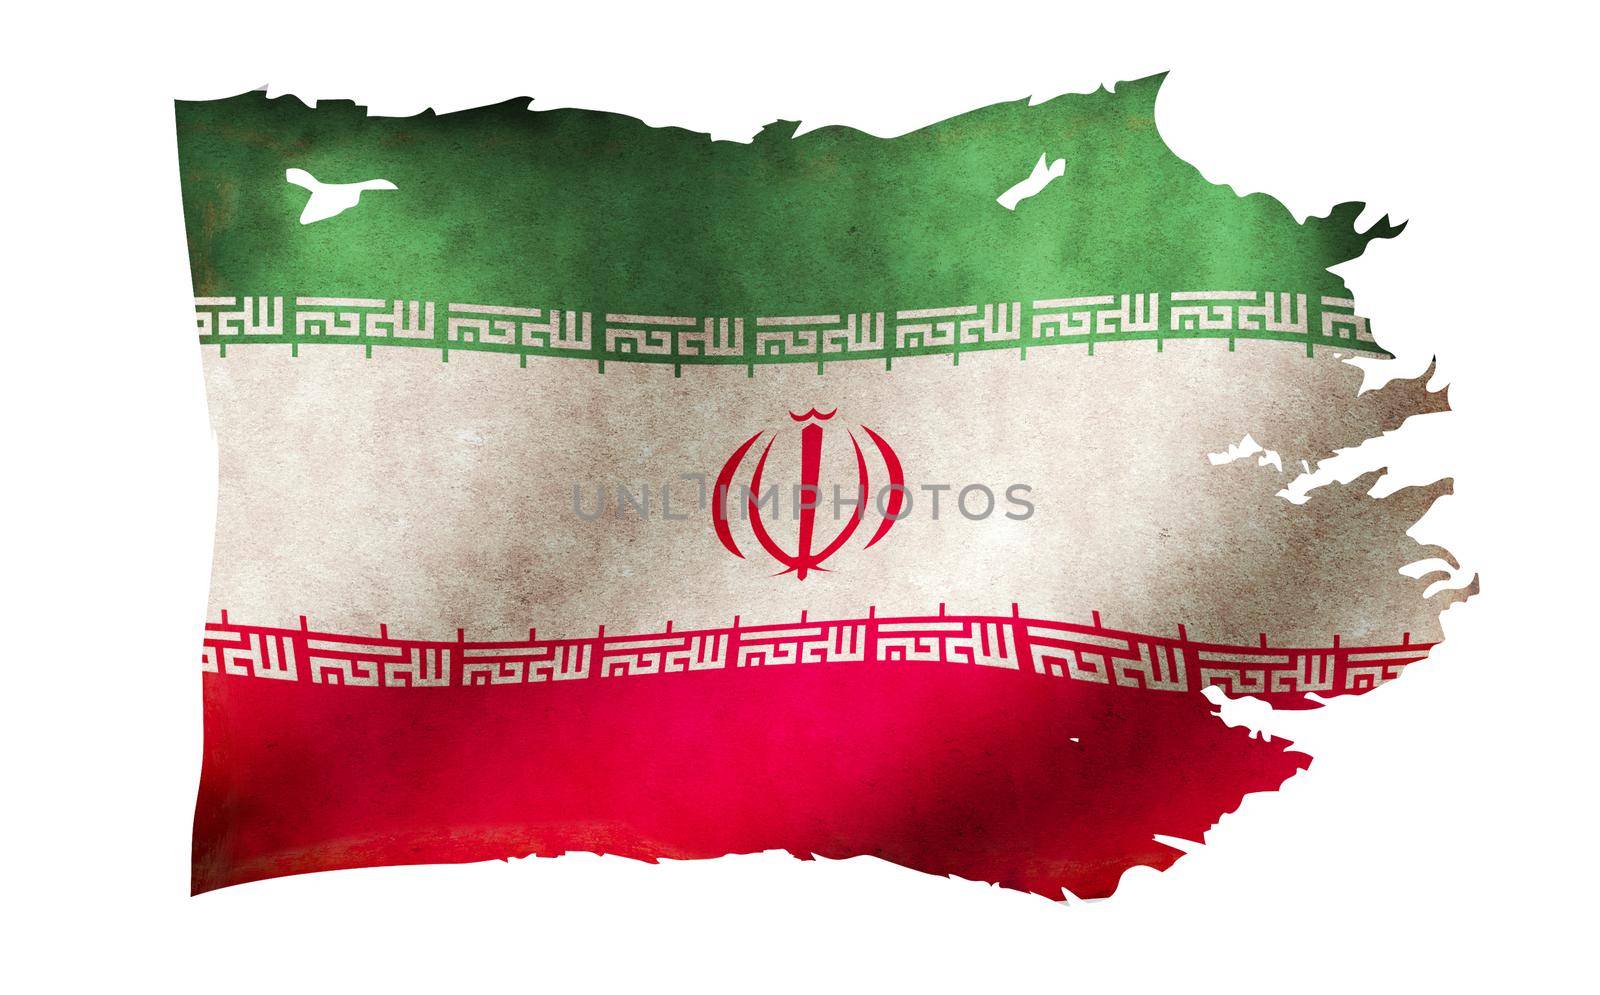 Dirty and torn country flag illustration / Iran by barks